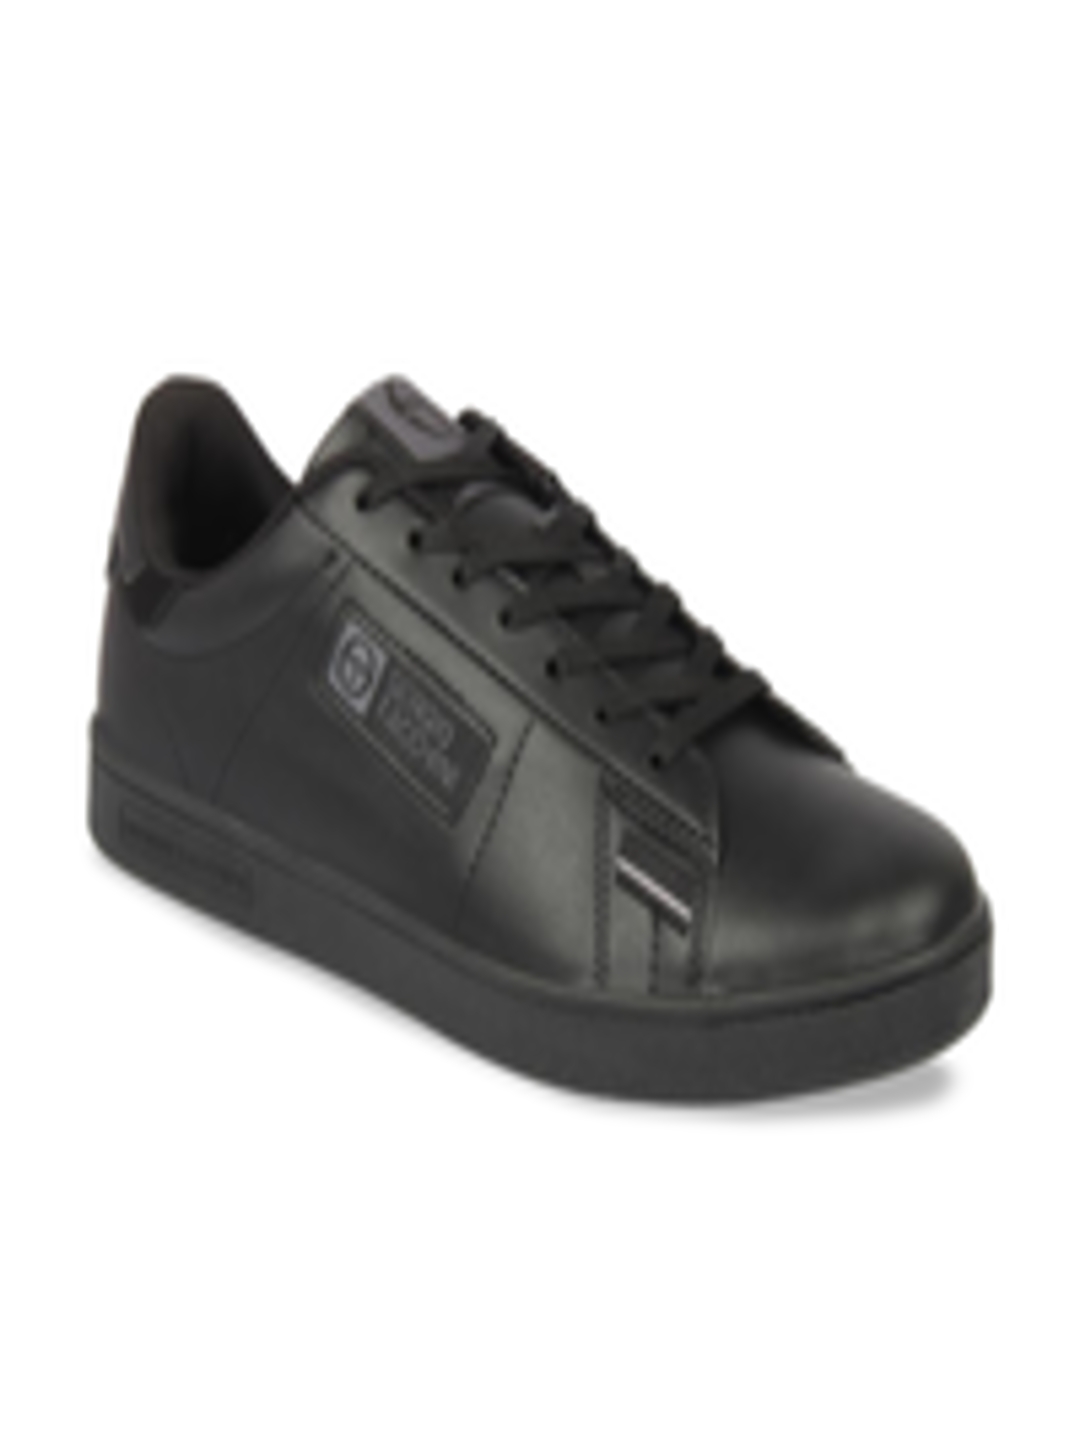 Buy Sergio Tacchini Men Black Sneakers Casual Shoes for